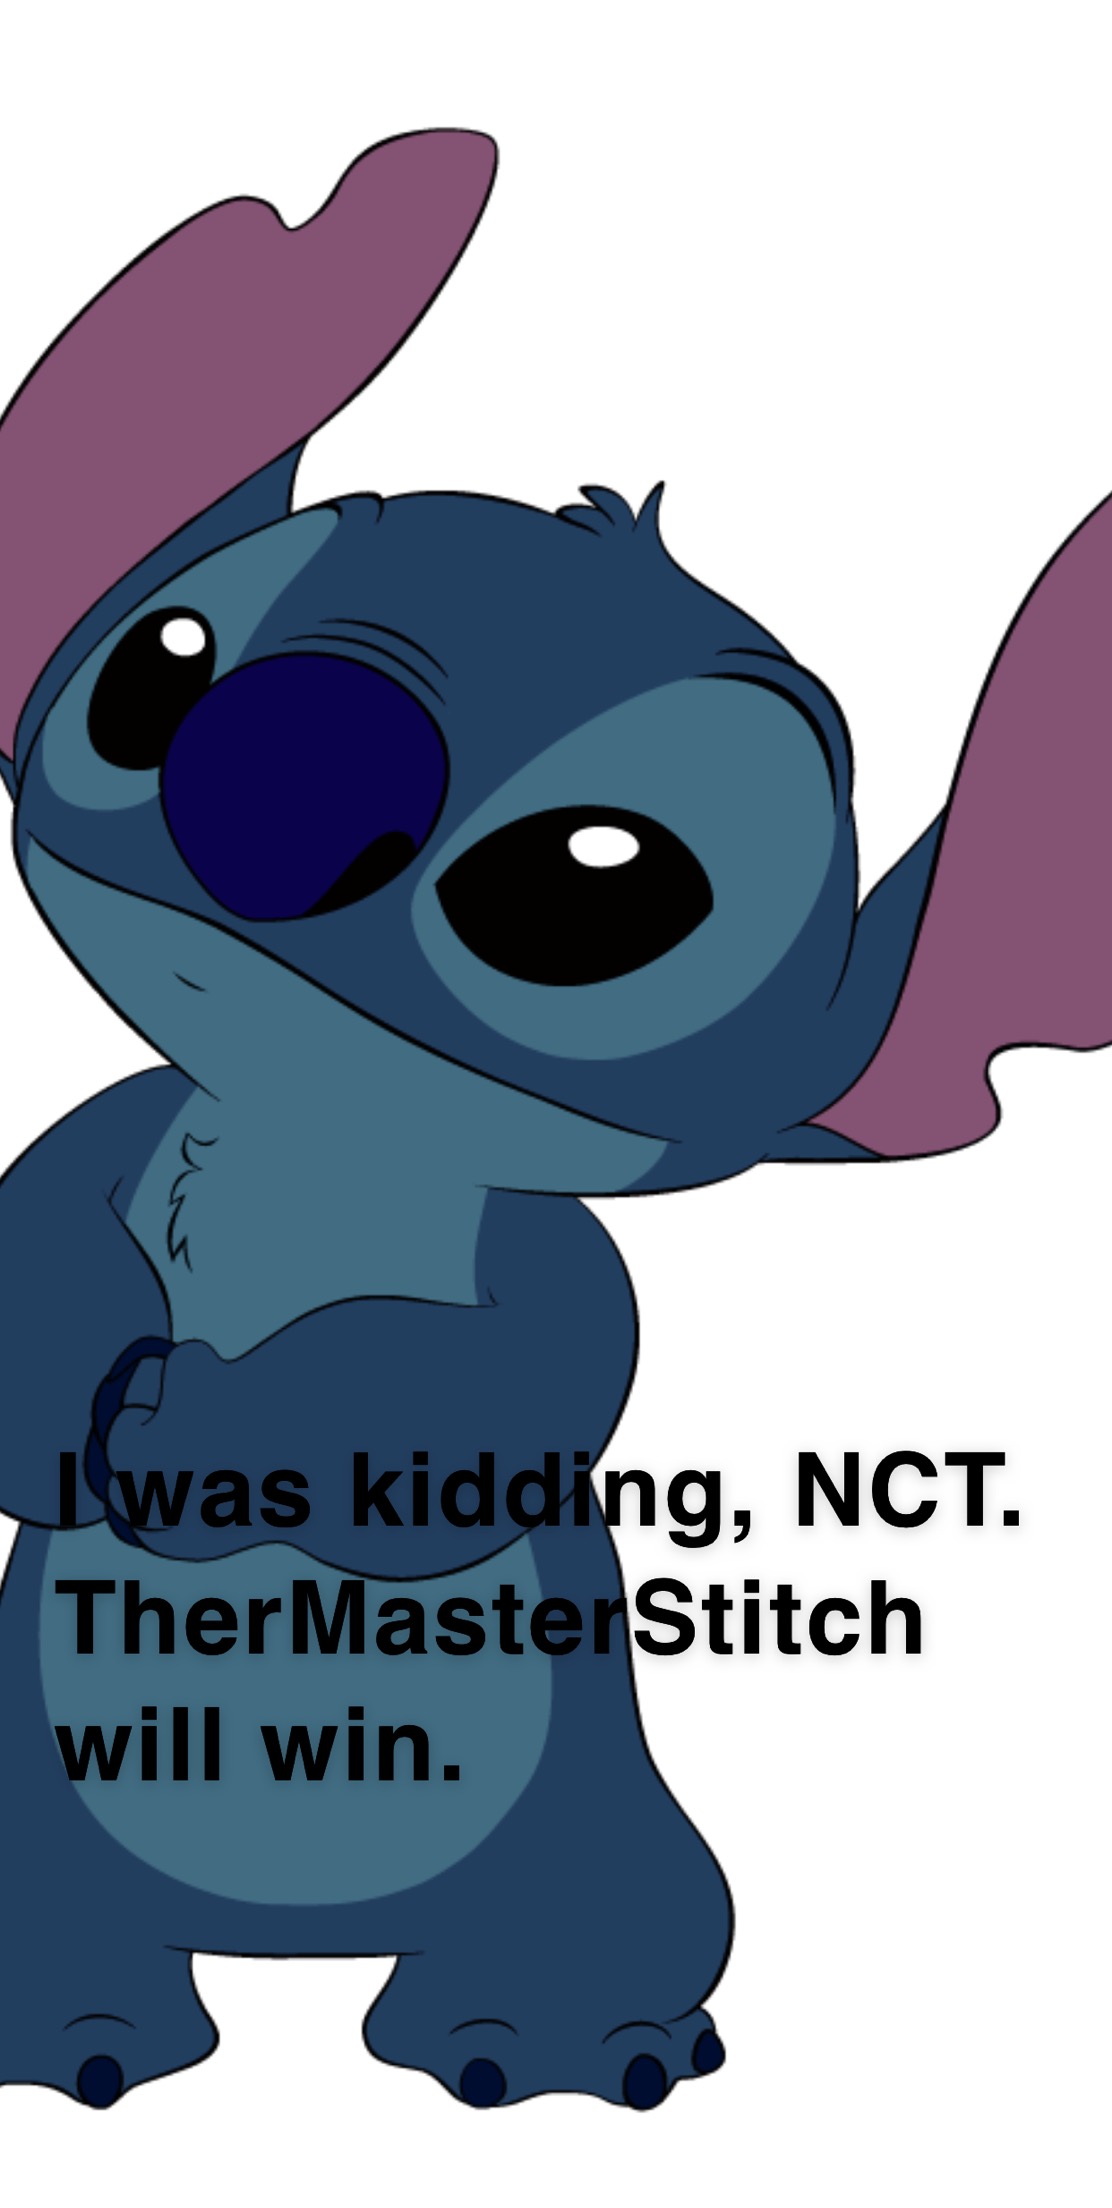 stitch with @tictatts lol can't blame ya for picking it mean ass